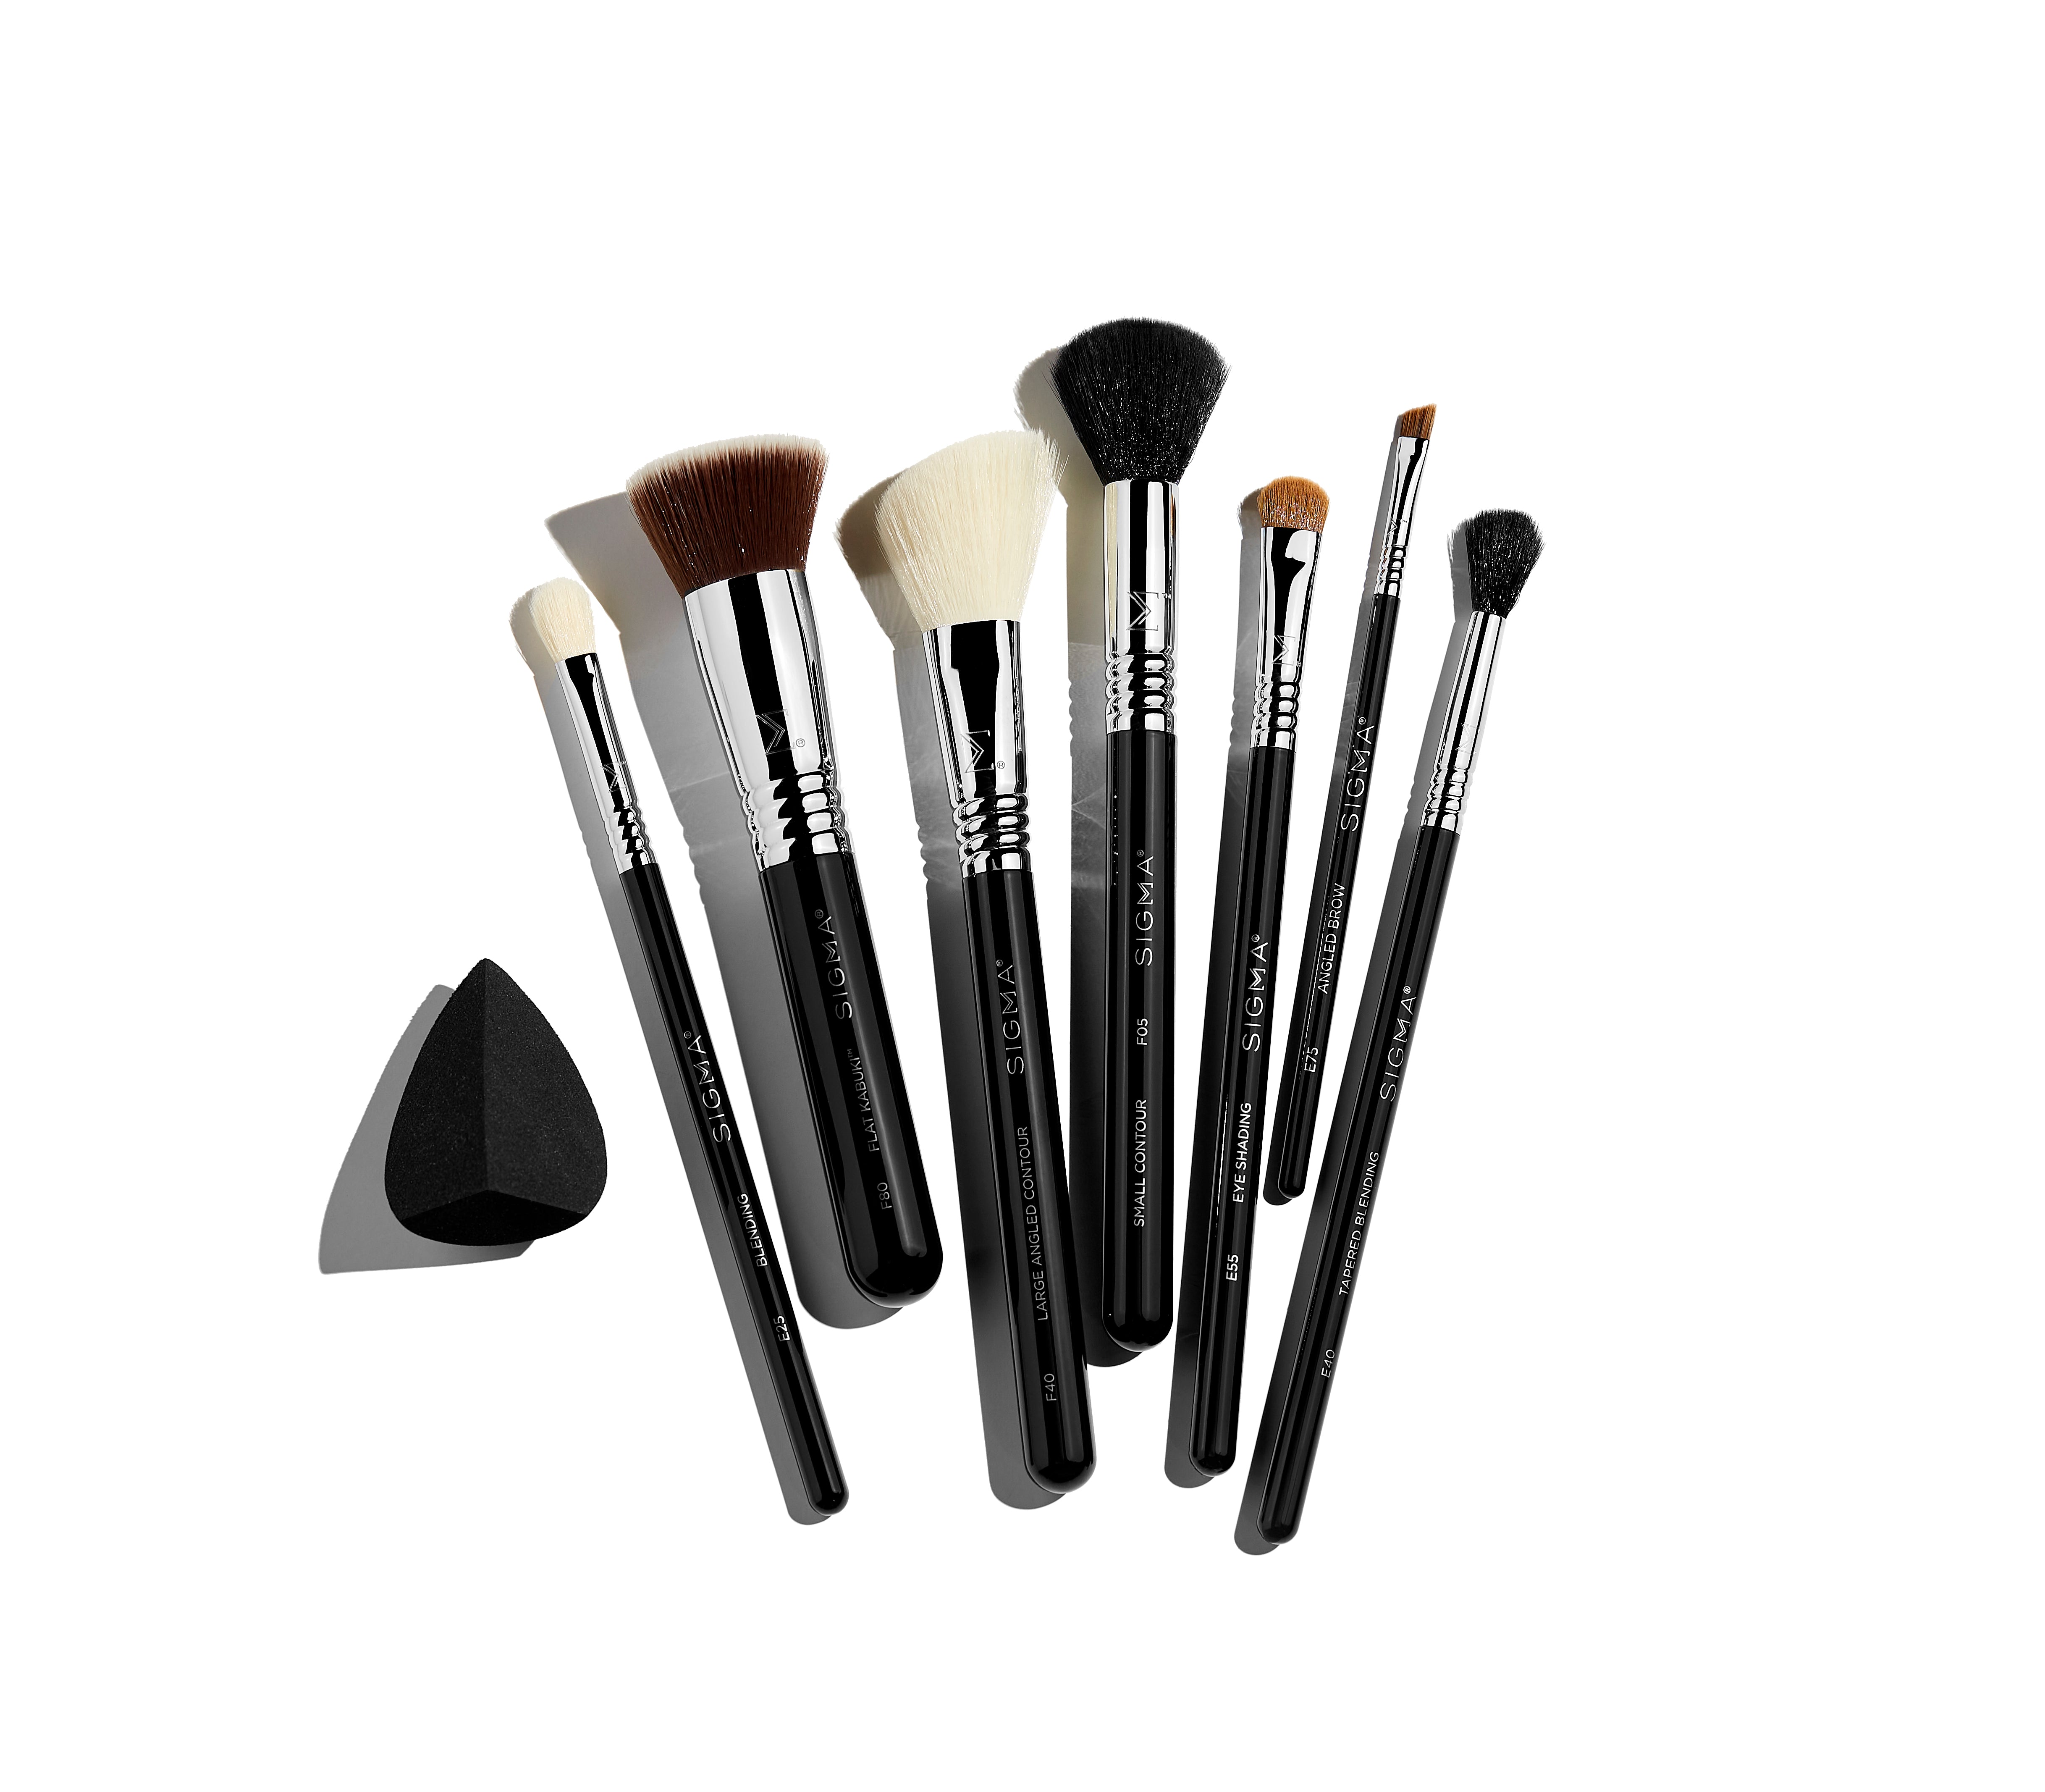 BEST IN THE BUSINESS BRUSH SET